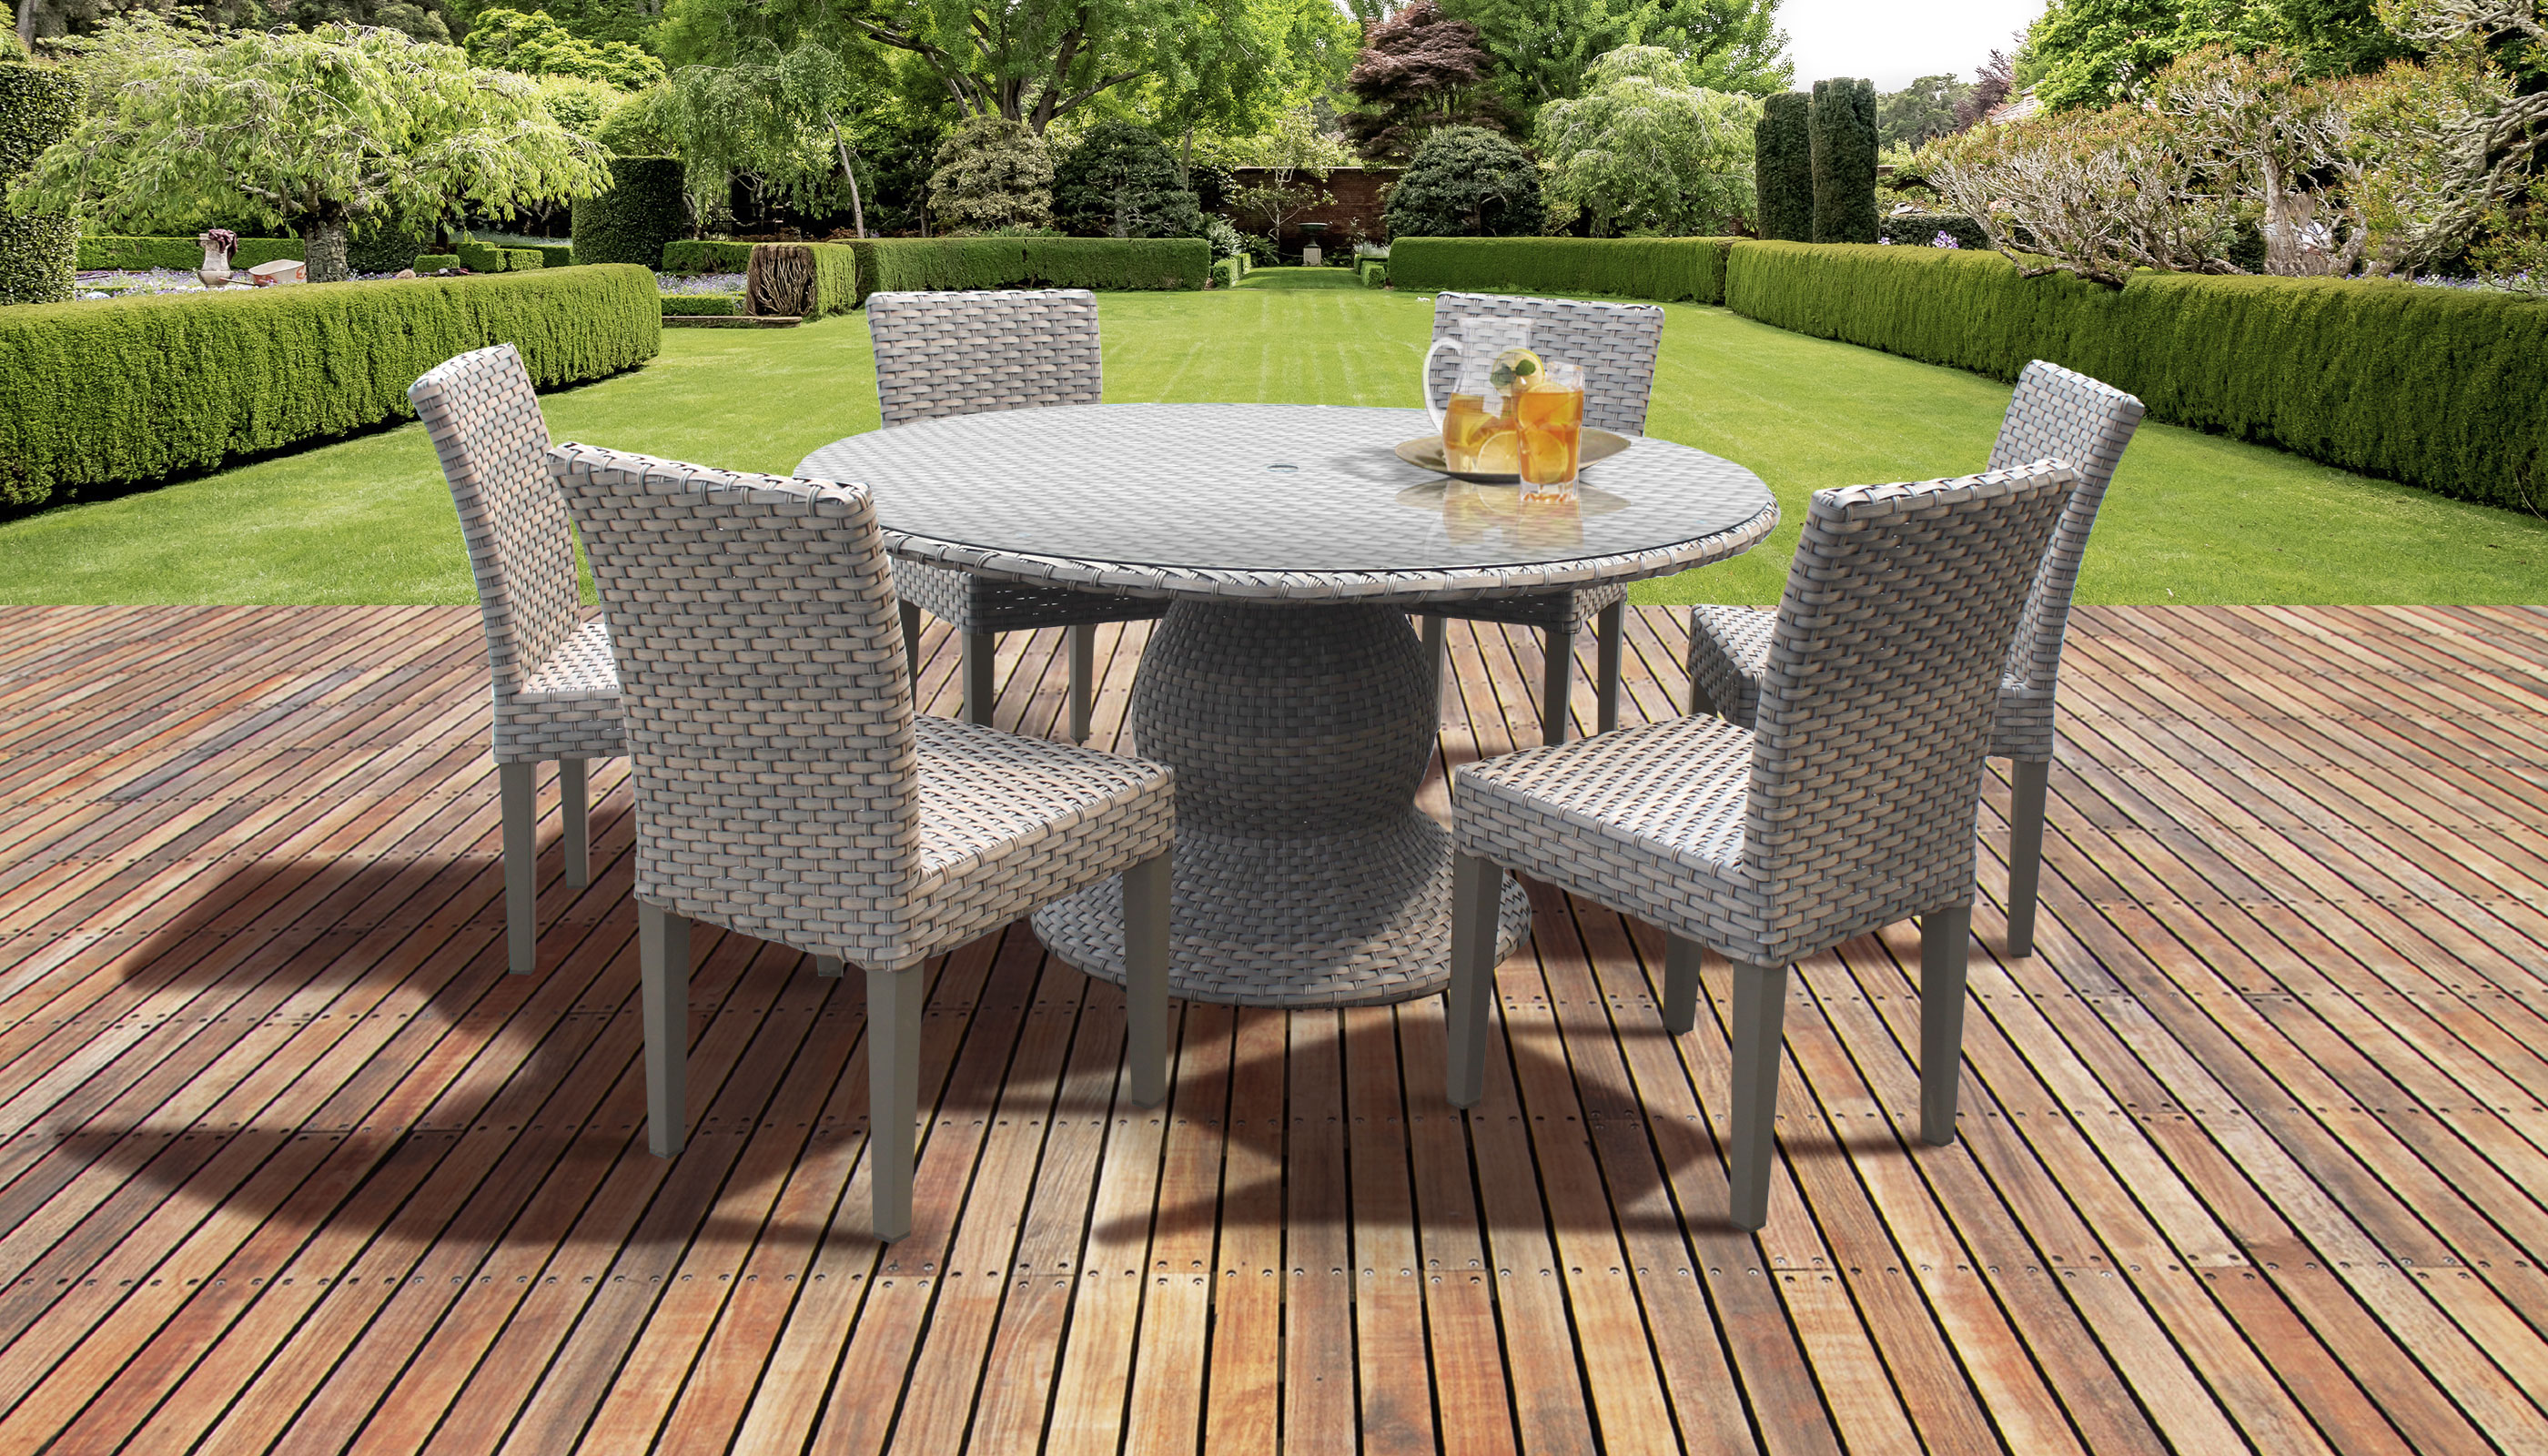 Outdoor Patio Dining Room Chair Round Cushions